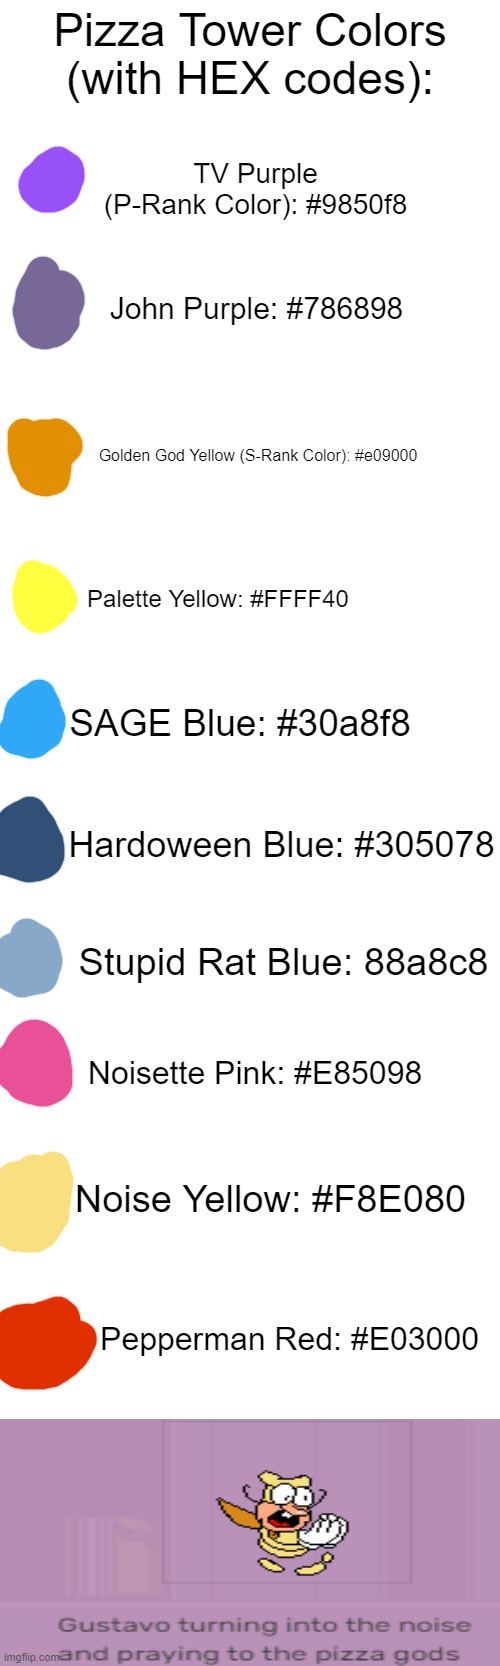 First set of Pizza Tower Colors! | Pizza Tower Colors (with HEX codes):; TV Purple (P-Rank Color): #9850f8; John Purple: #786898; Golden God Yellow (S-Rank Color): #e09000; Palette Yellow: #FFFF40; SAGE Blue: #30a8f8; Hardoween Blue: #305078; Stupid Rat Blue: 88a8c8; Noisette Pink: #E85098; Noise Yellow: #F8E080; Pepperman Red: #E03000 | image tagged in pizza tower | made w/ Imgflip meme maker